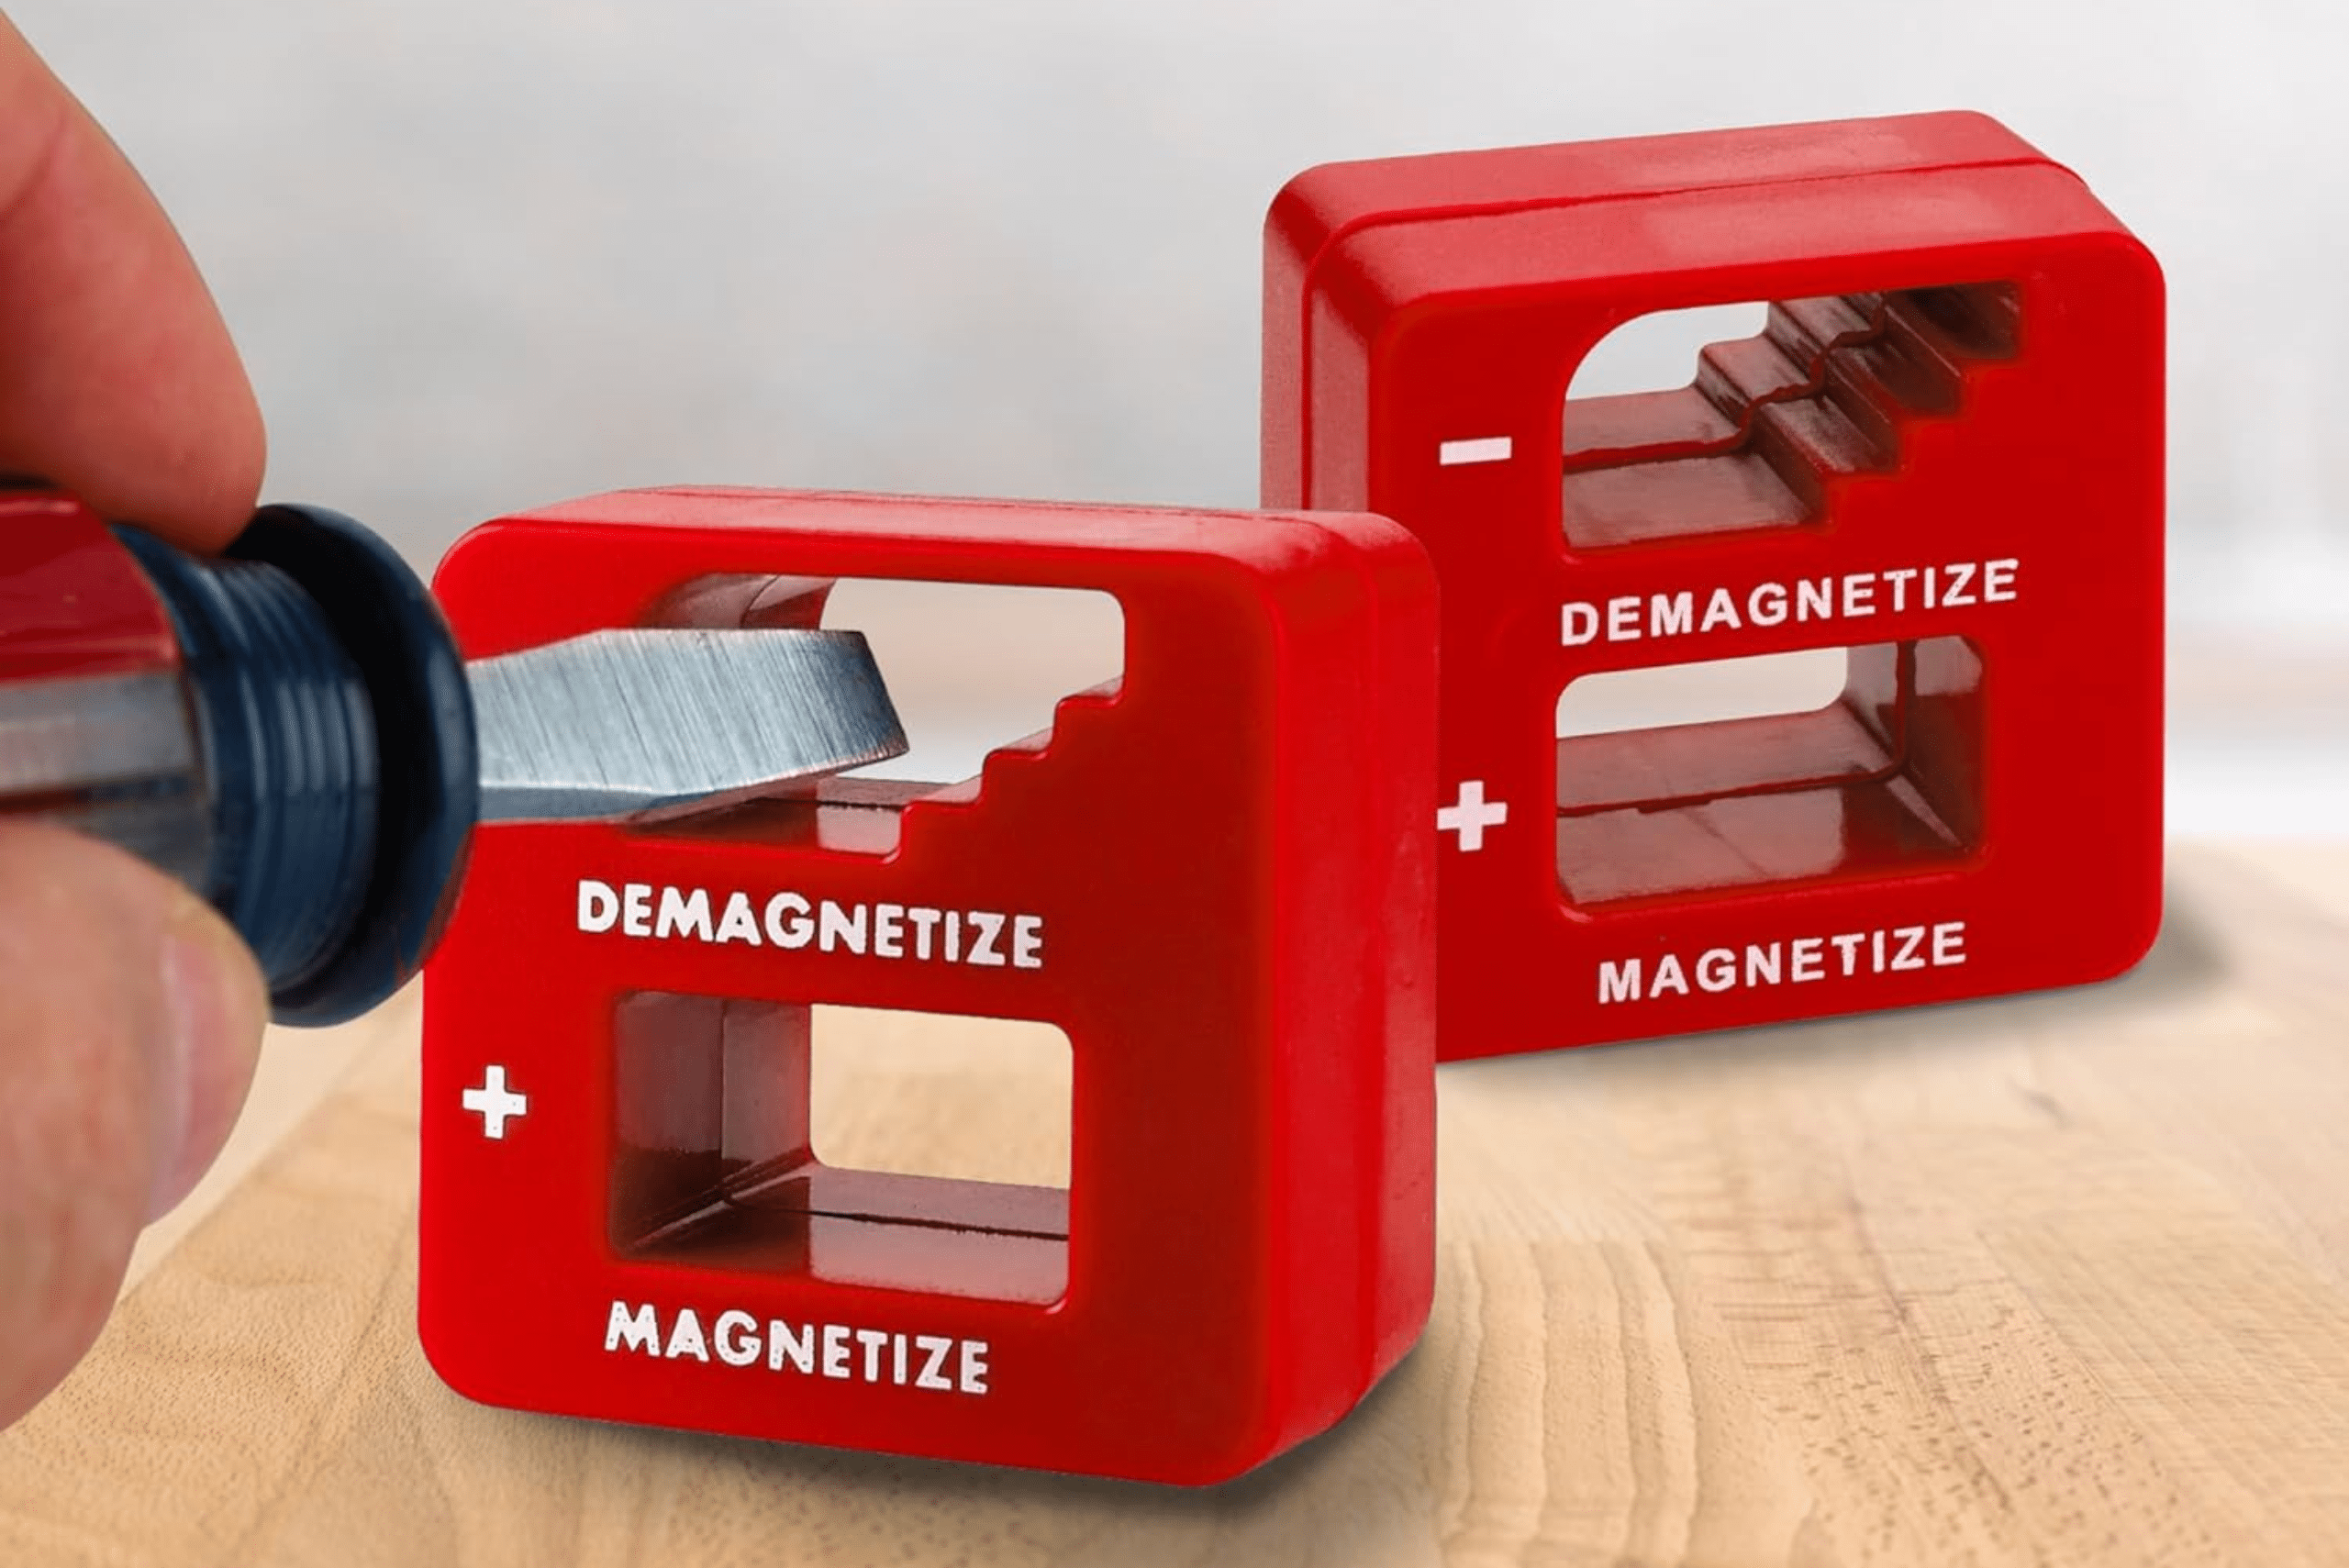 A red magnetizer tool.